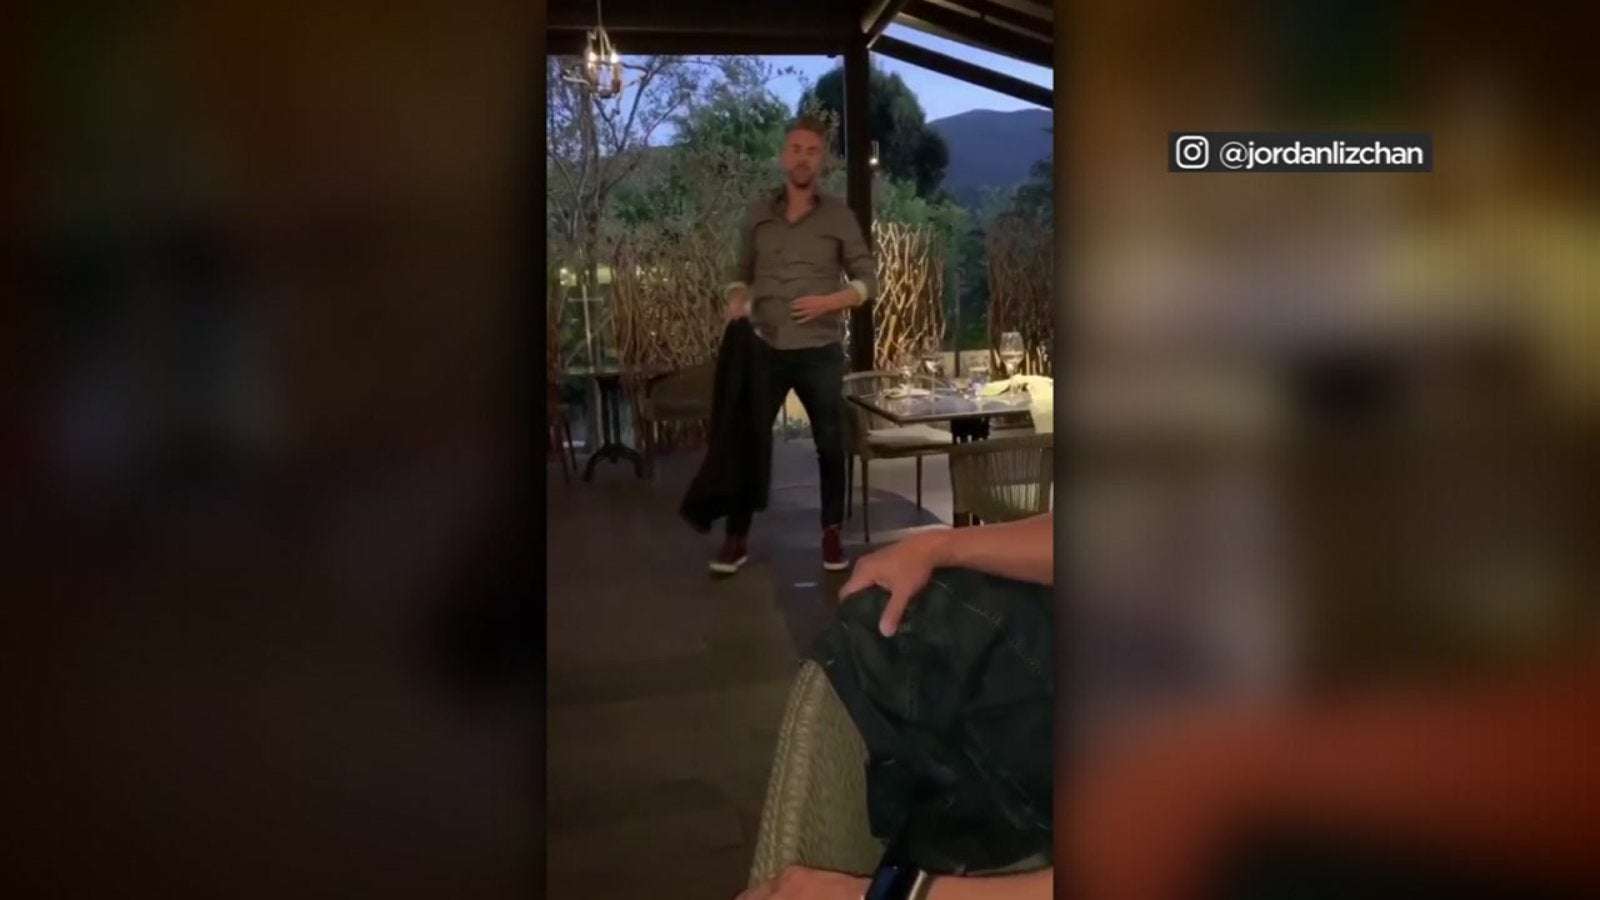 image for San Francisco tech CEO kicked out of Carmel Valley restaurant following racist rant caught on camera